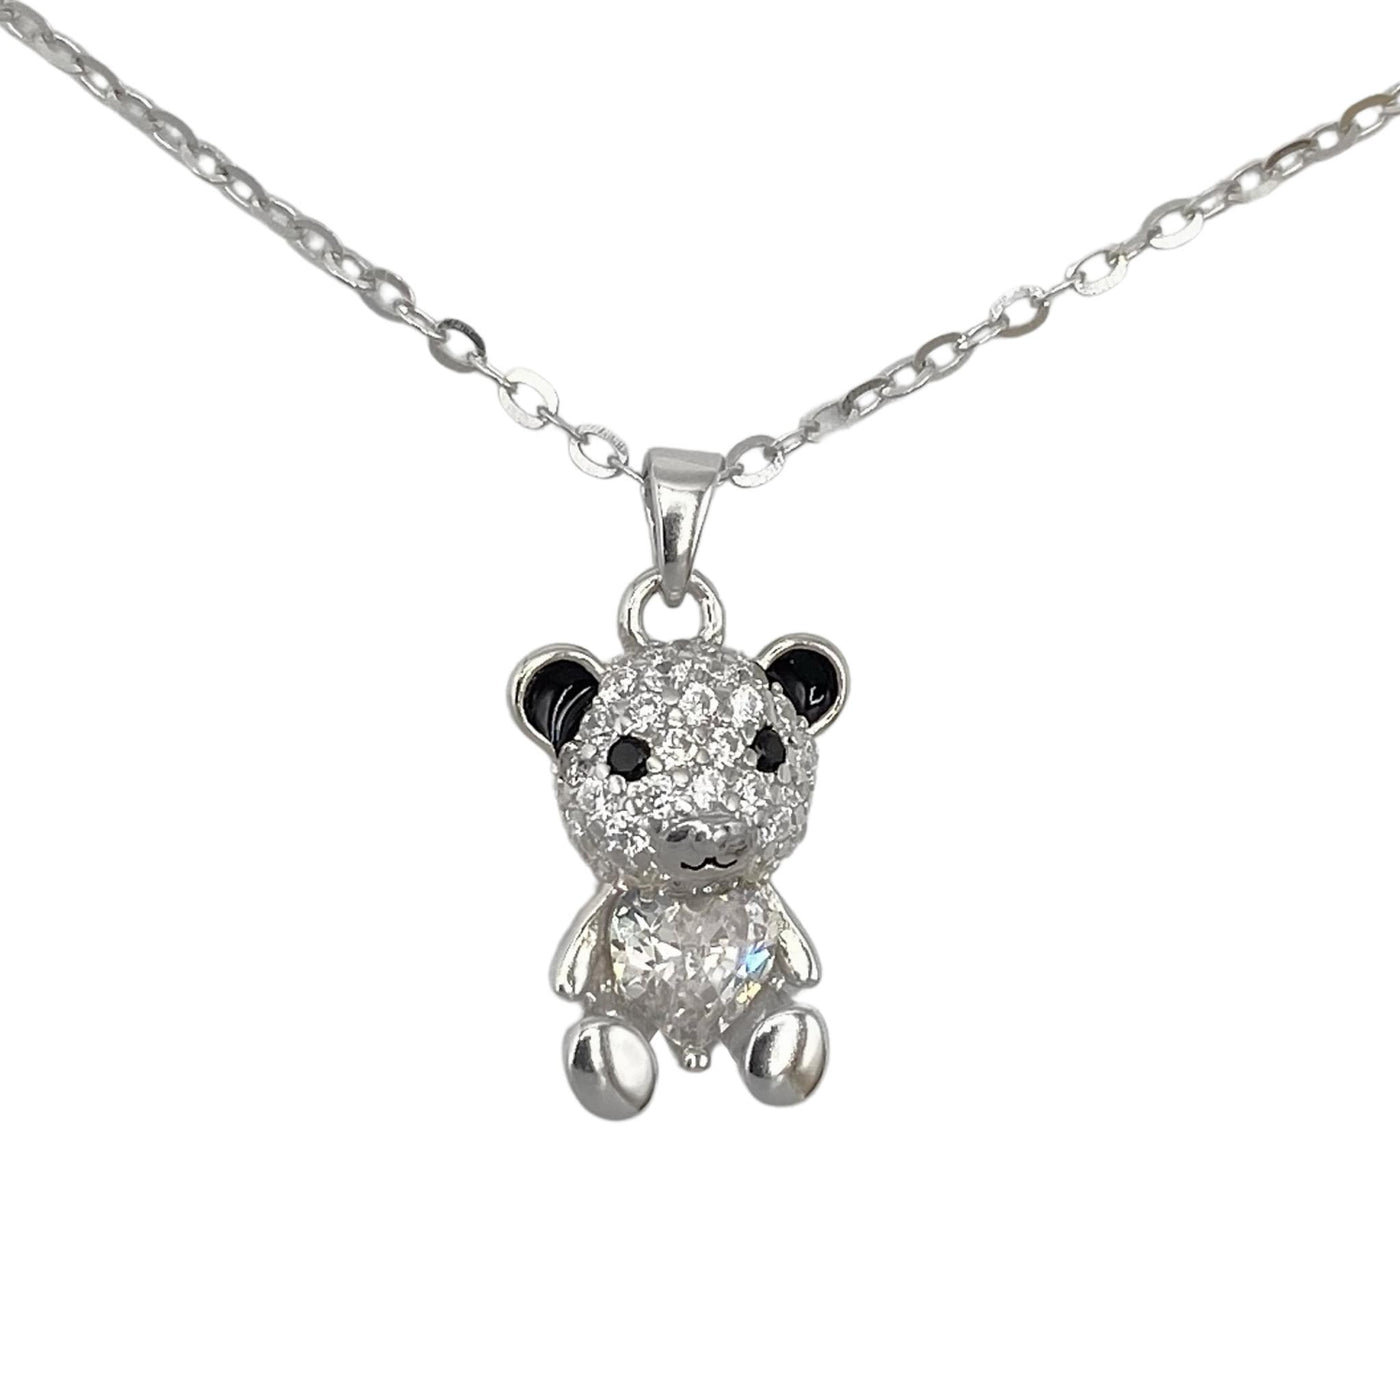 Silver necklace with Bear charm